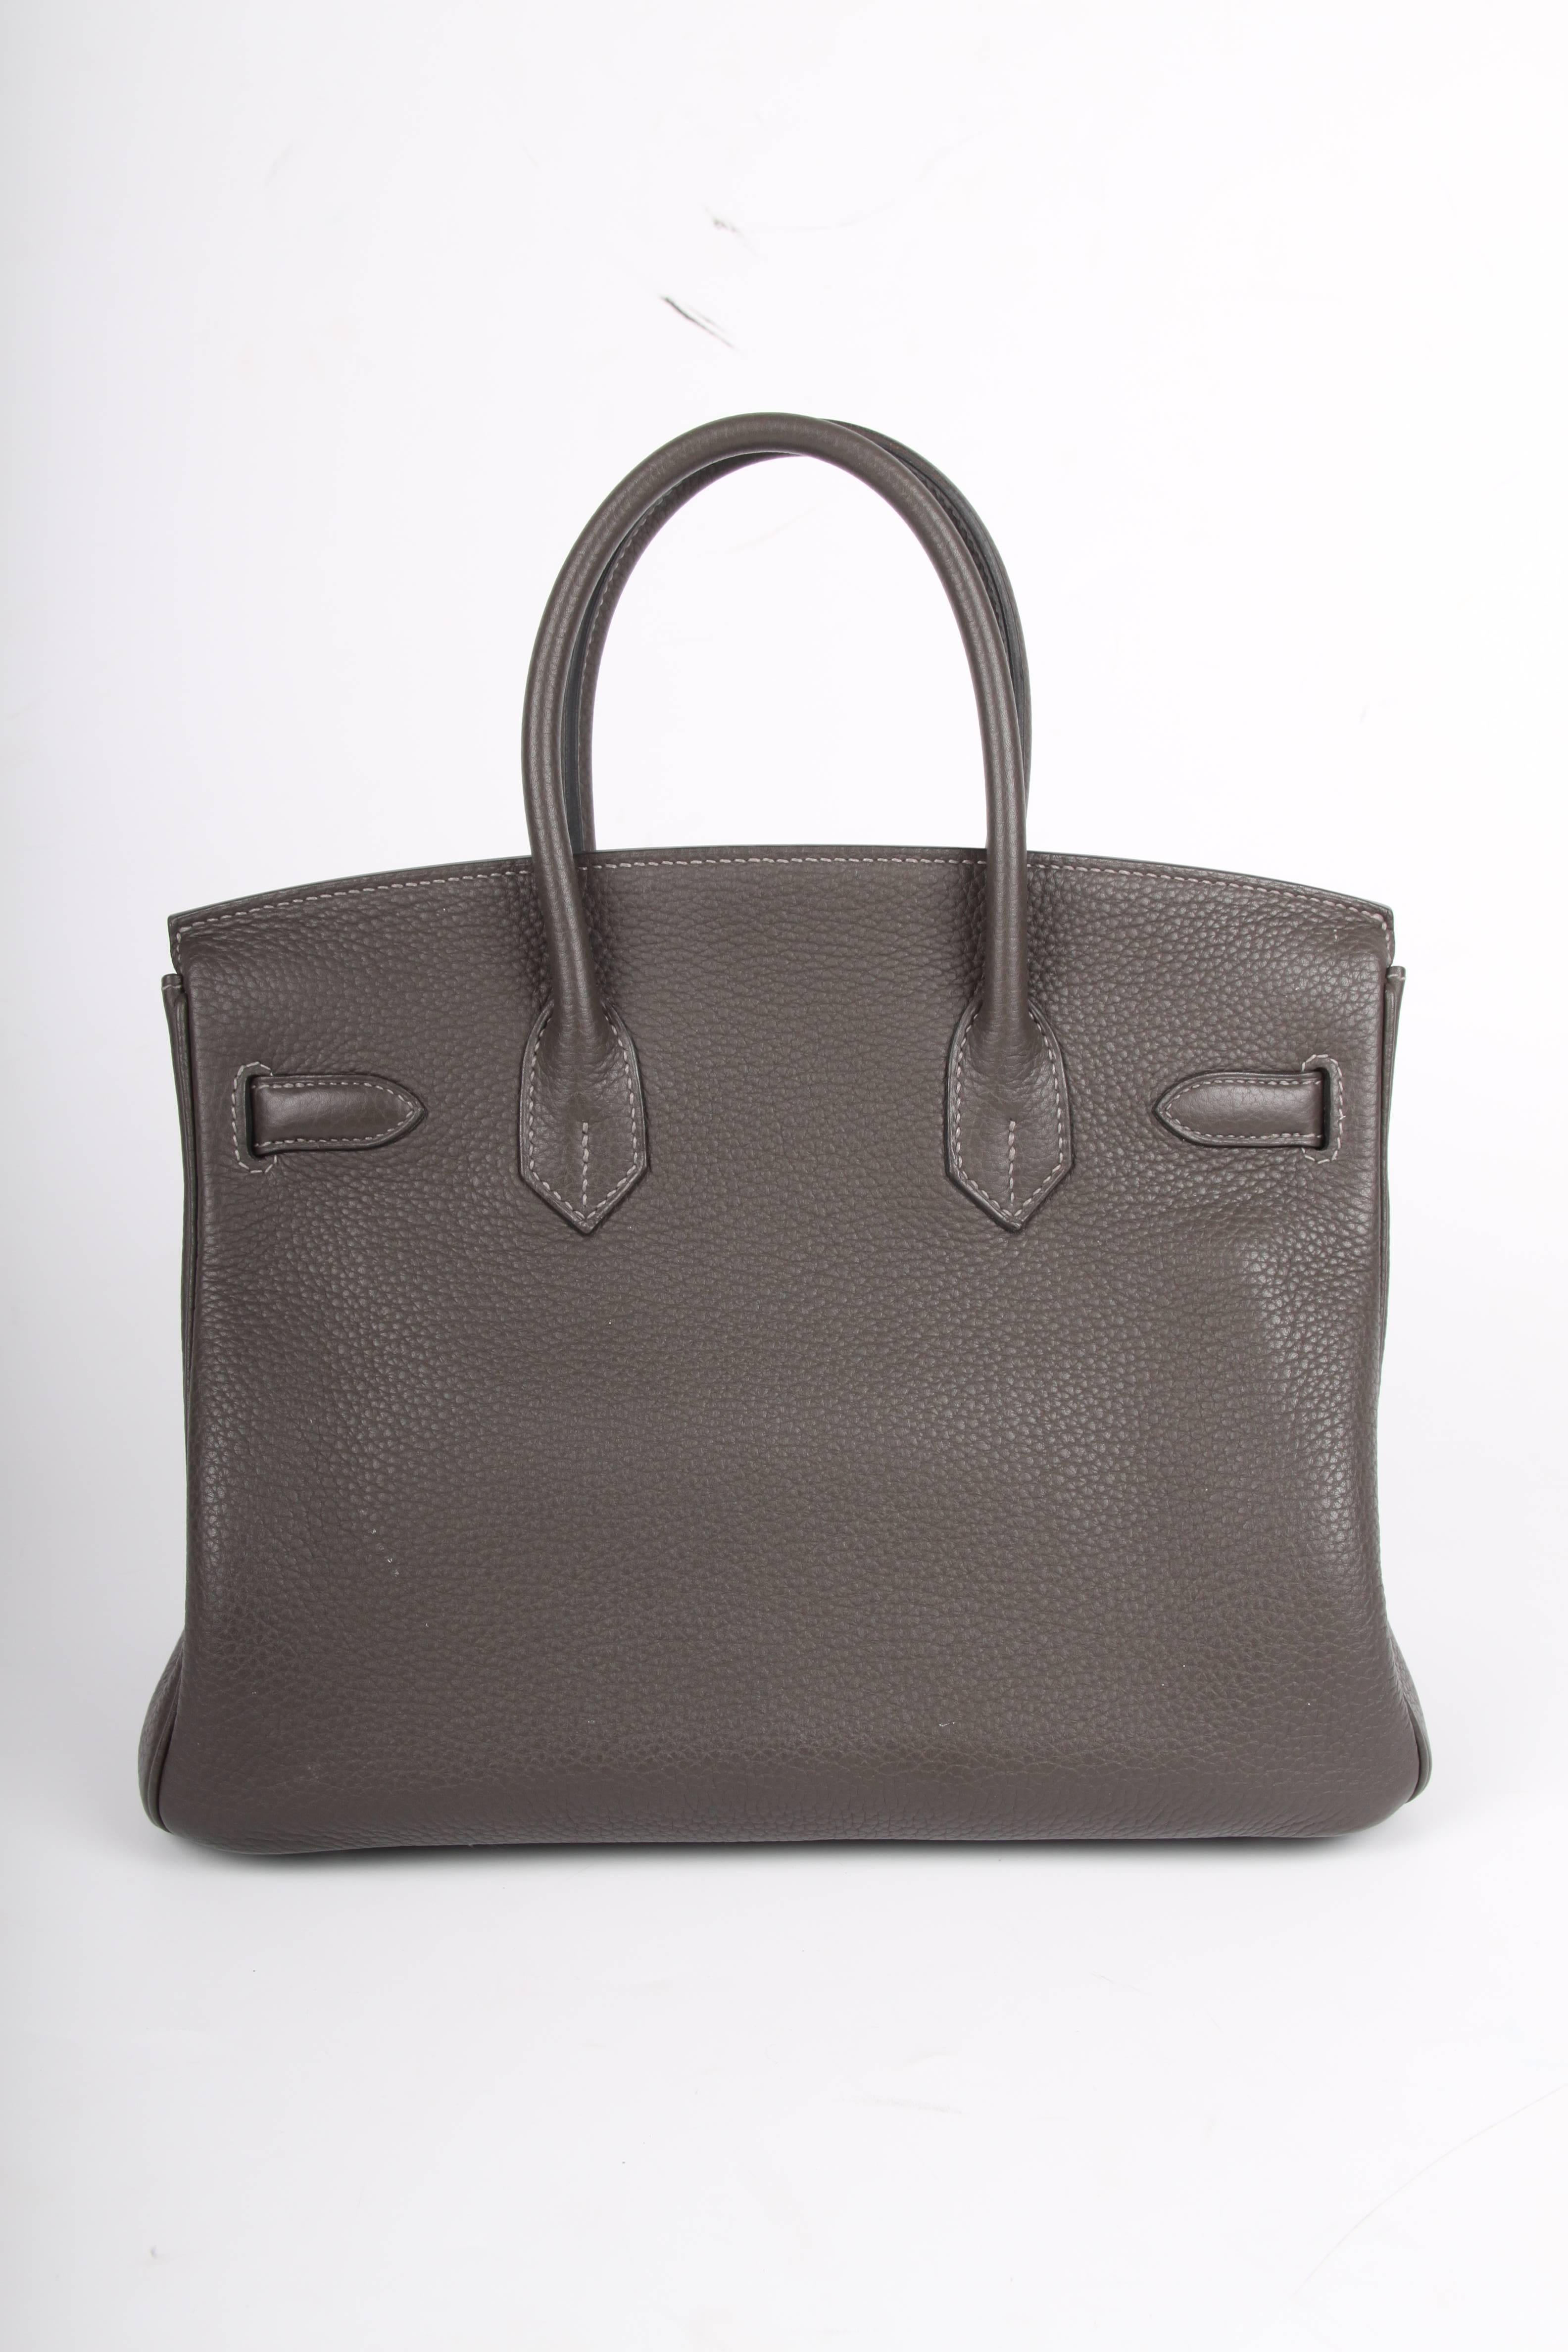 This bag is absolutely gorgeous; a Hermès Birkin Bag 30 with silver-tone hardware in dark grey Clemence leather, this color is called Graphite.

Front toggle closure, clochette with lock and two keys, and double rolled handles. The Clemence leather